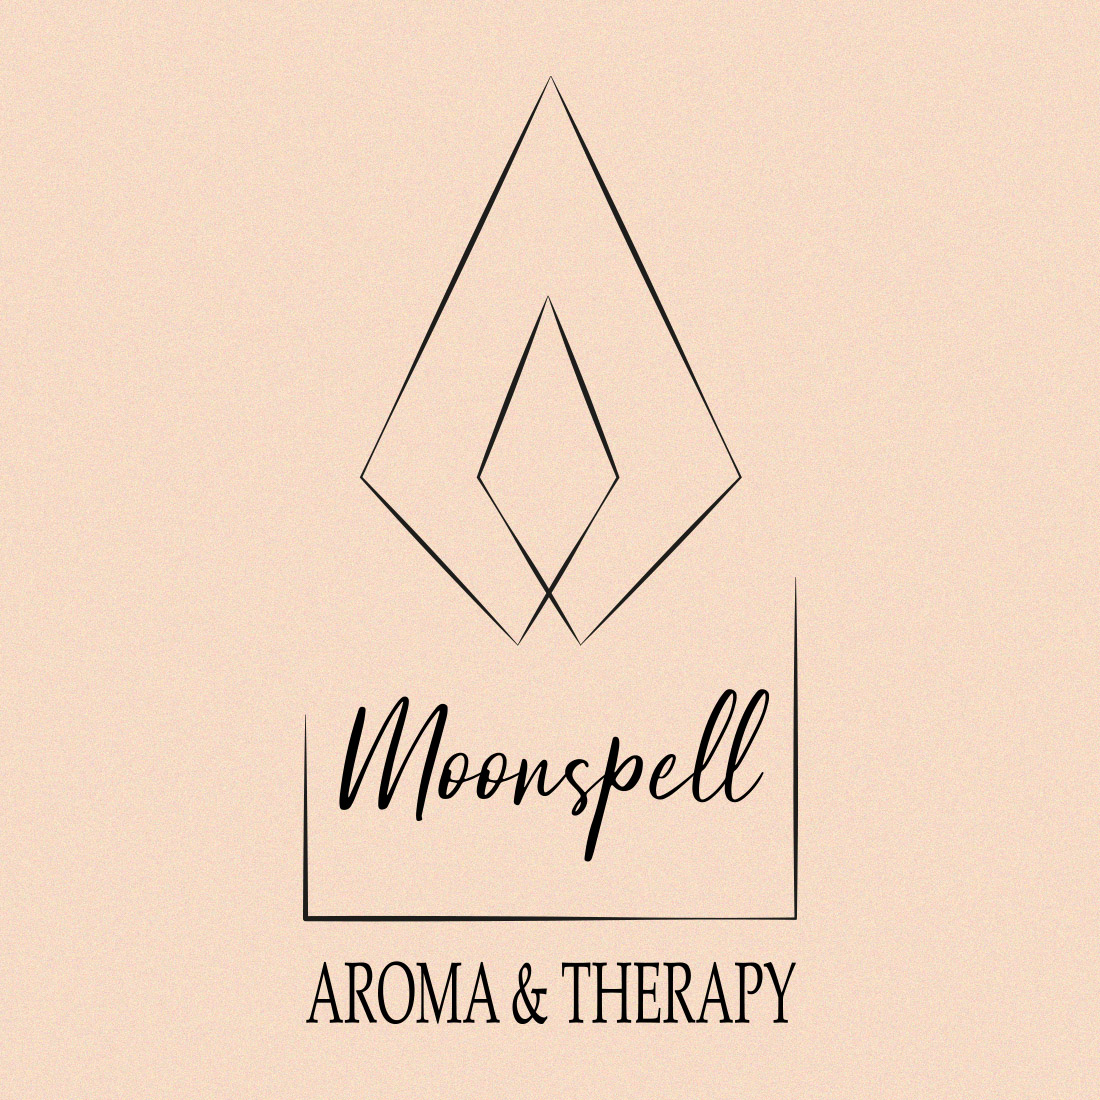 Aroma Candles Black Vector Logo cover image.